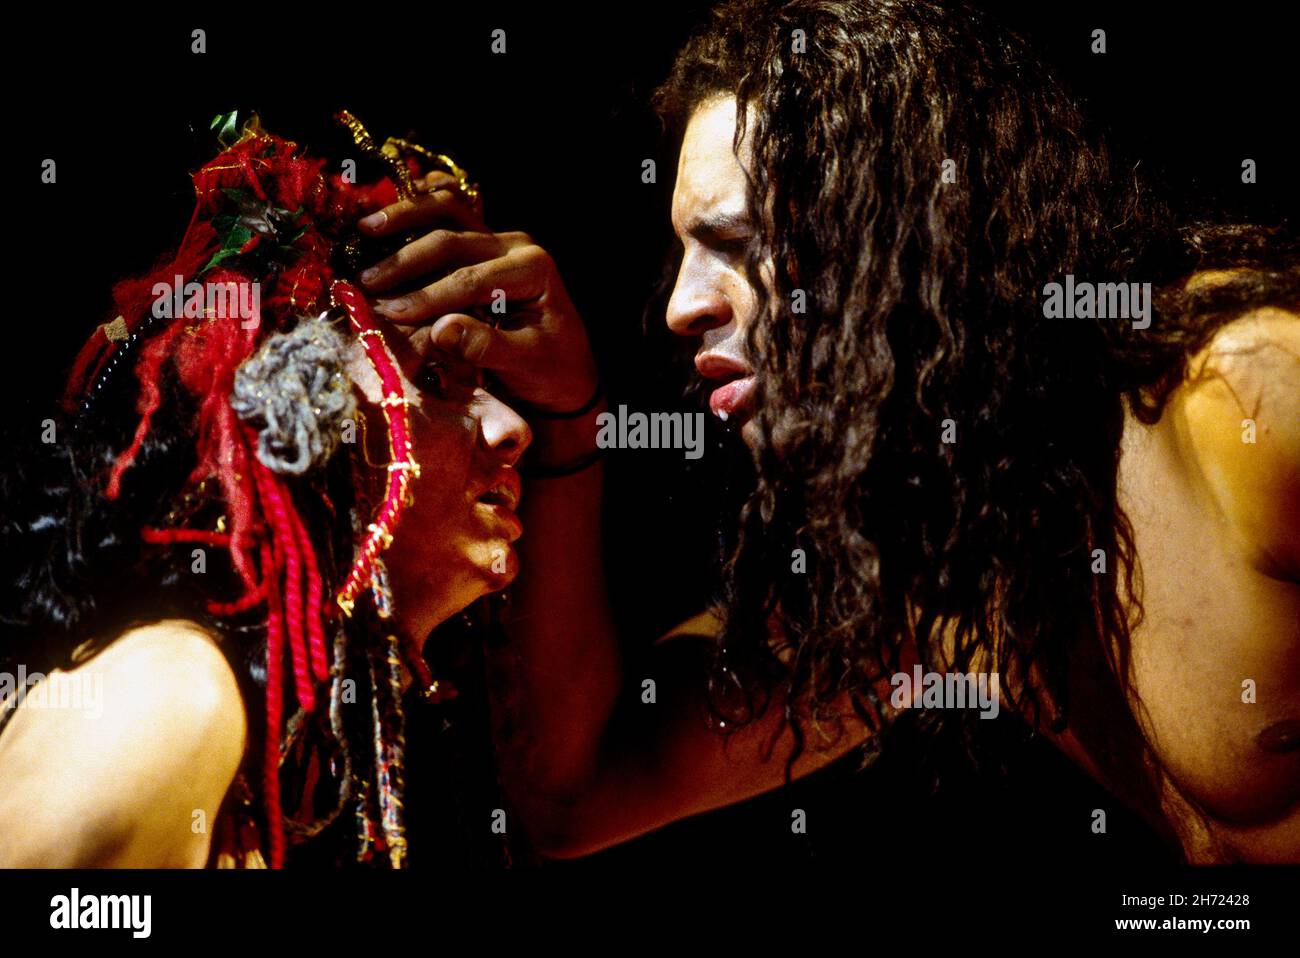 Veronica Duffy (Agave), Joe Dixon (Dionysus) in THE BACCHAE presented by Opera Factory at the Queen Elizabeth Hall (QEH), London SE1 02/09/1993 Musik: Iannis Xenakis Text: C K Williams after Euripides Dirigent: Nichola Kok Design: David Roger Beleuchtung: Christopher Toulmin Regie: David Freeman Stockfoto